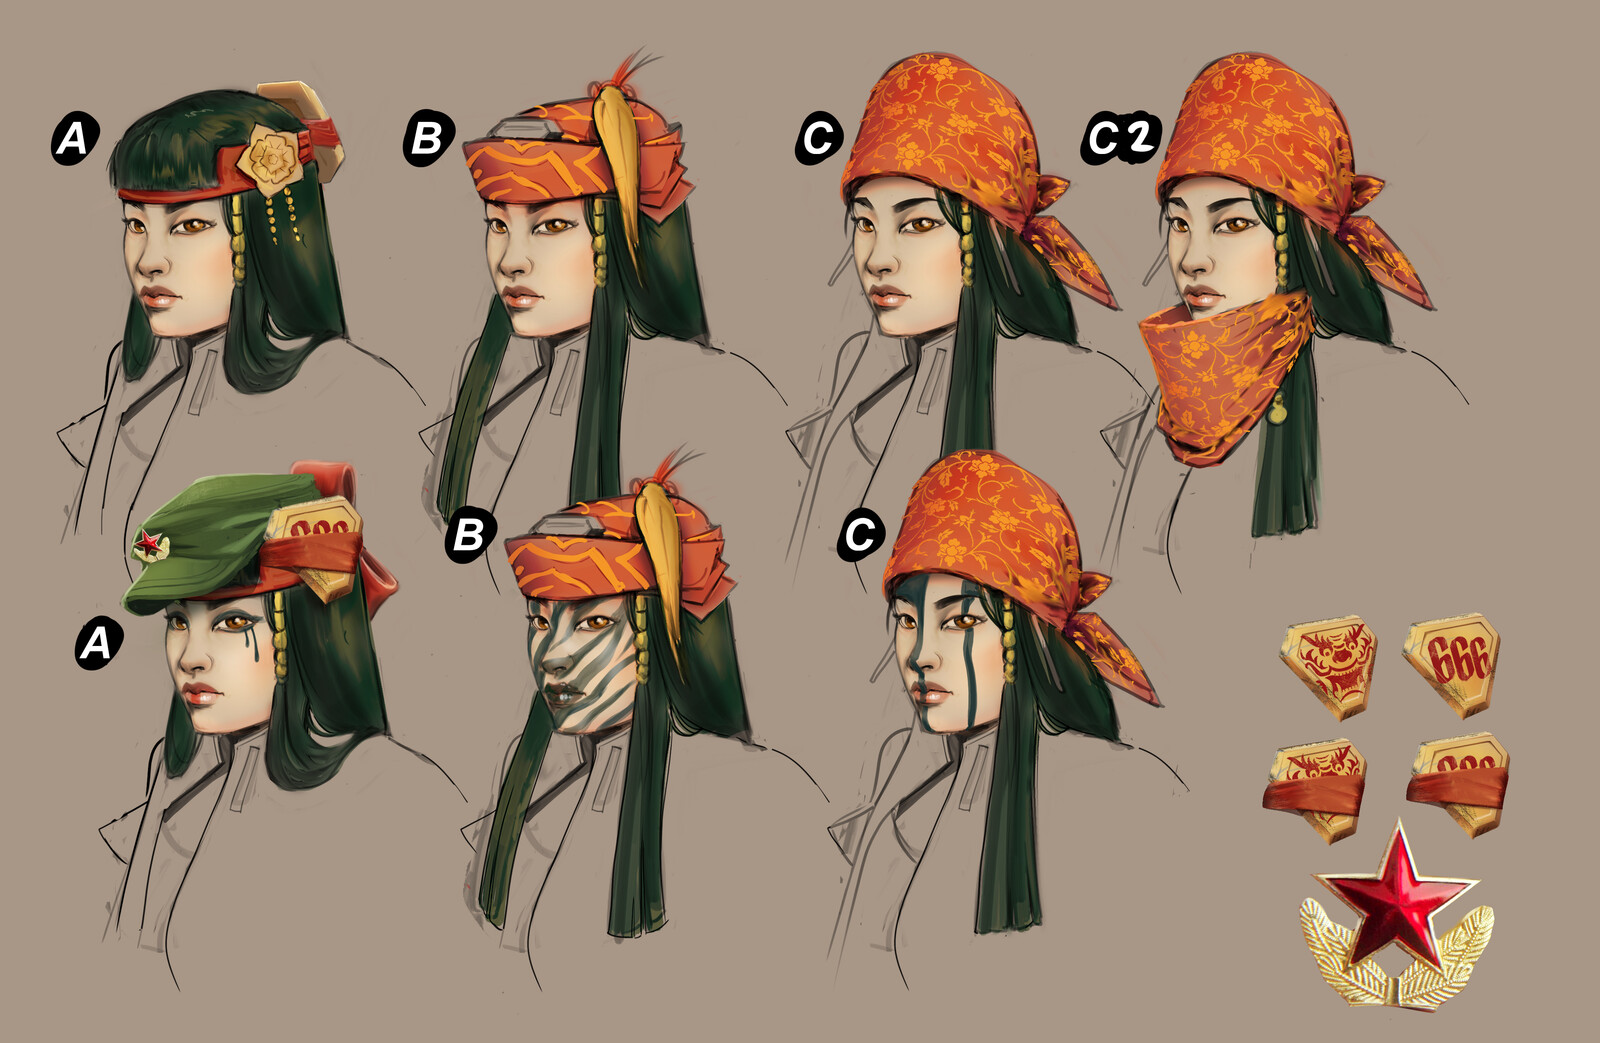 Some iterations for character's facial make up and headwear